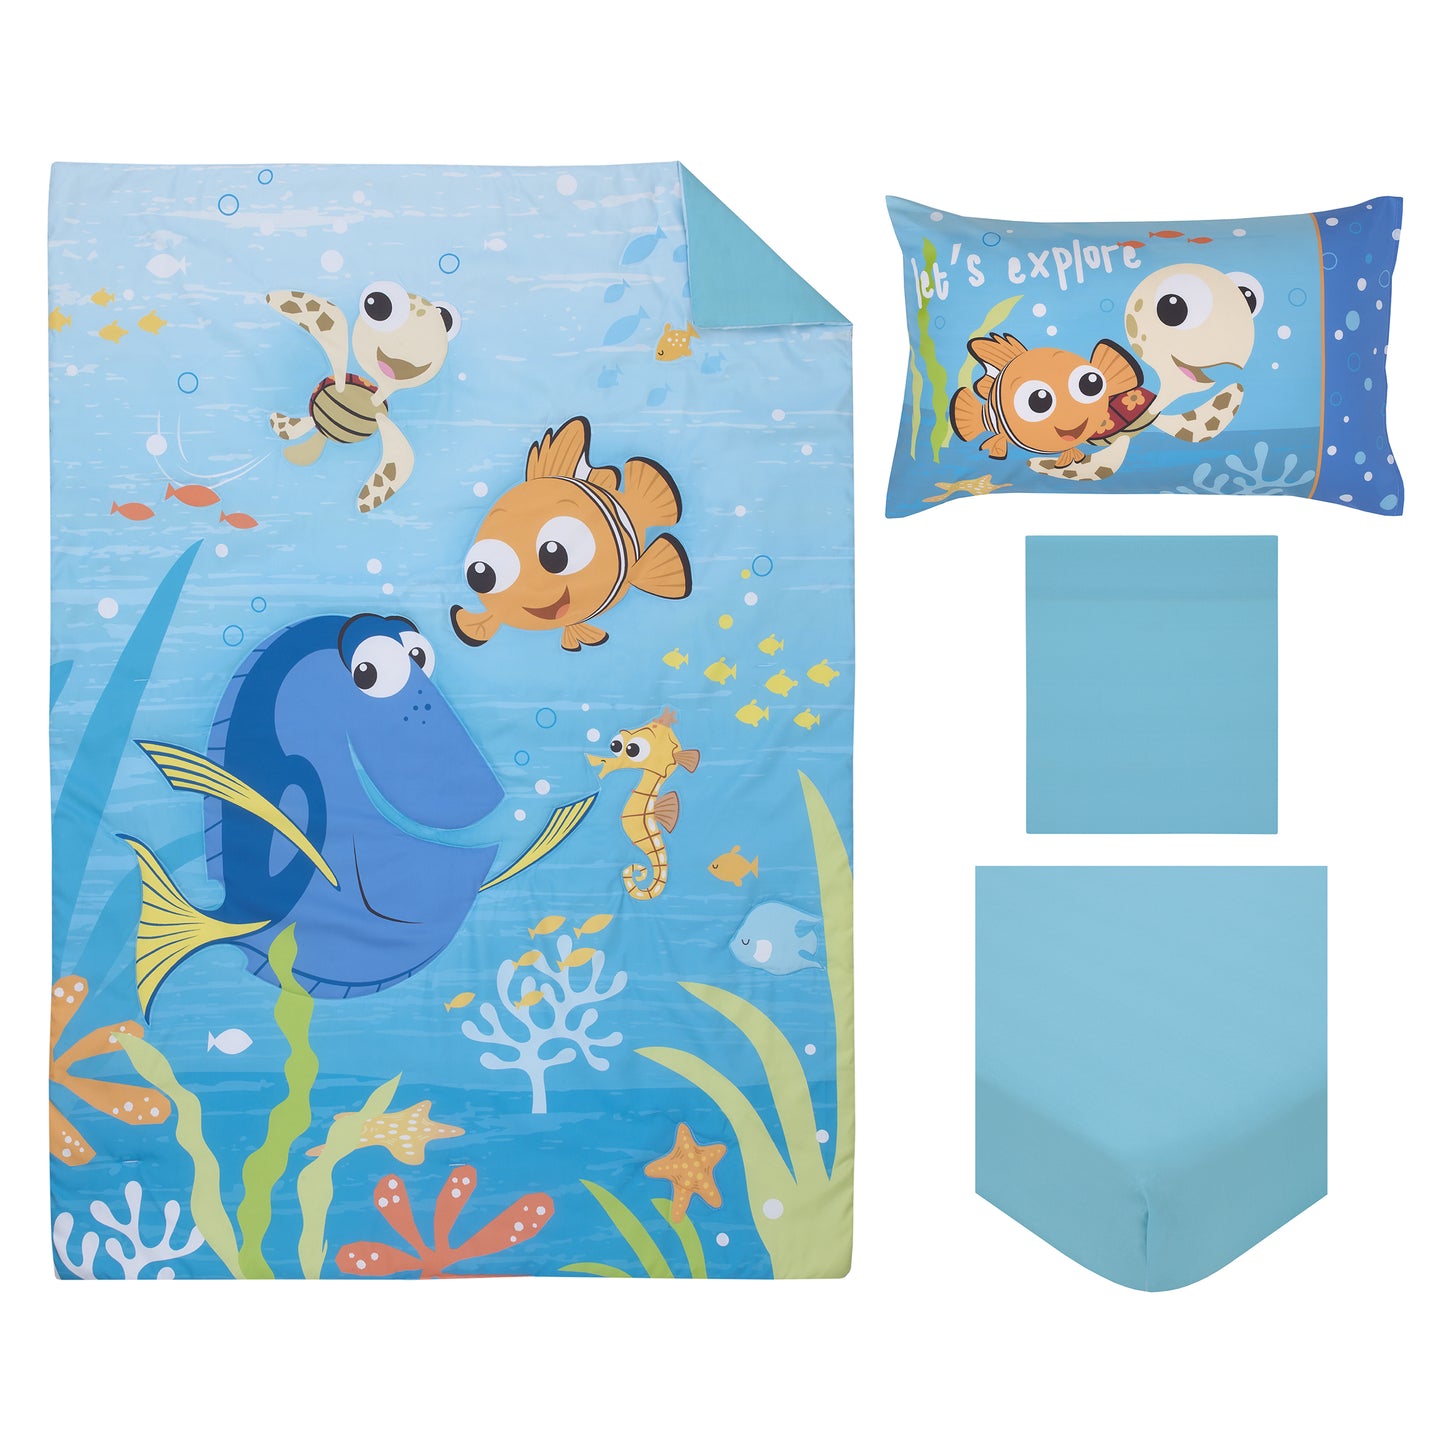 Disney Finding Nemo Aqua, Orange, and Green Let's Explore 4 Piece Toddler Bed Set - Comforter, Fitted Bottom Sheet, Flat Top Sheet, and Reversible Pillowcase